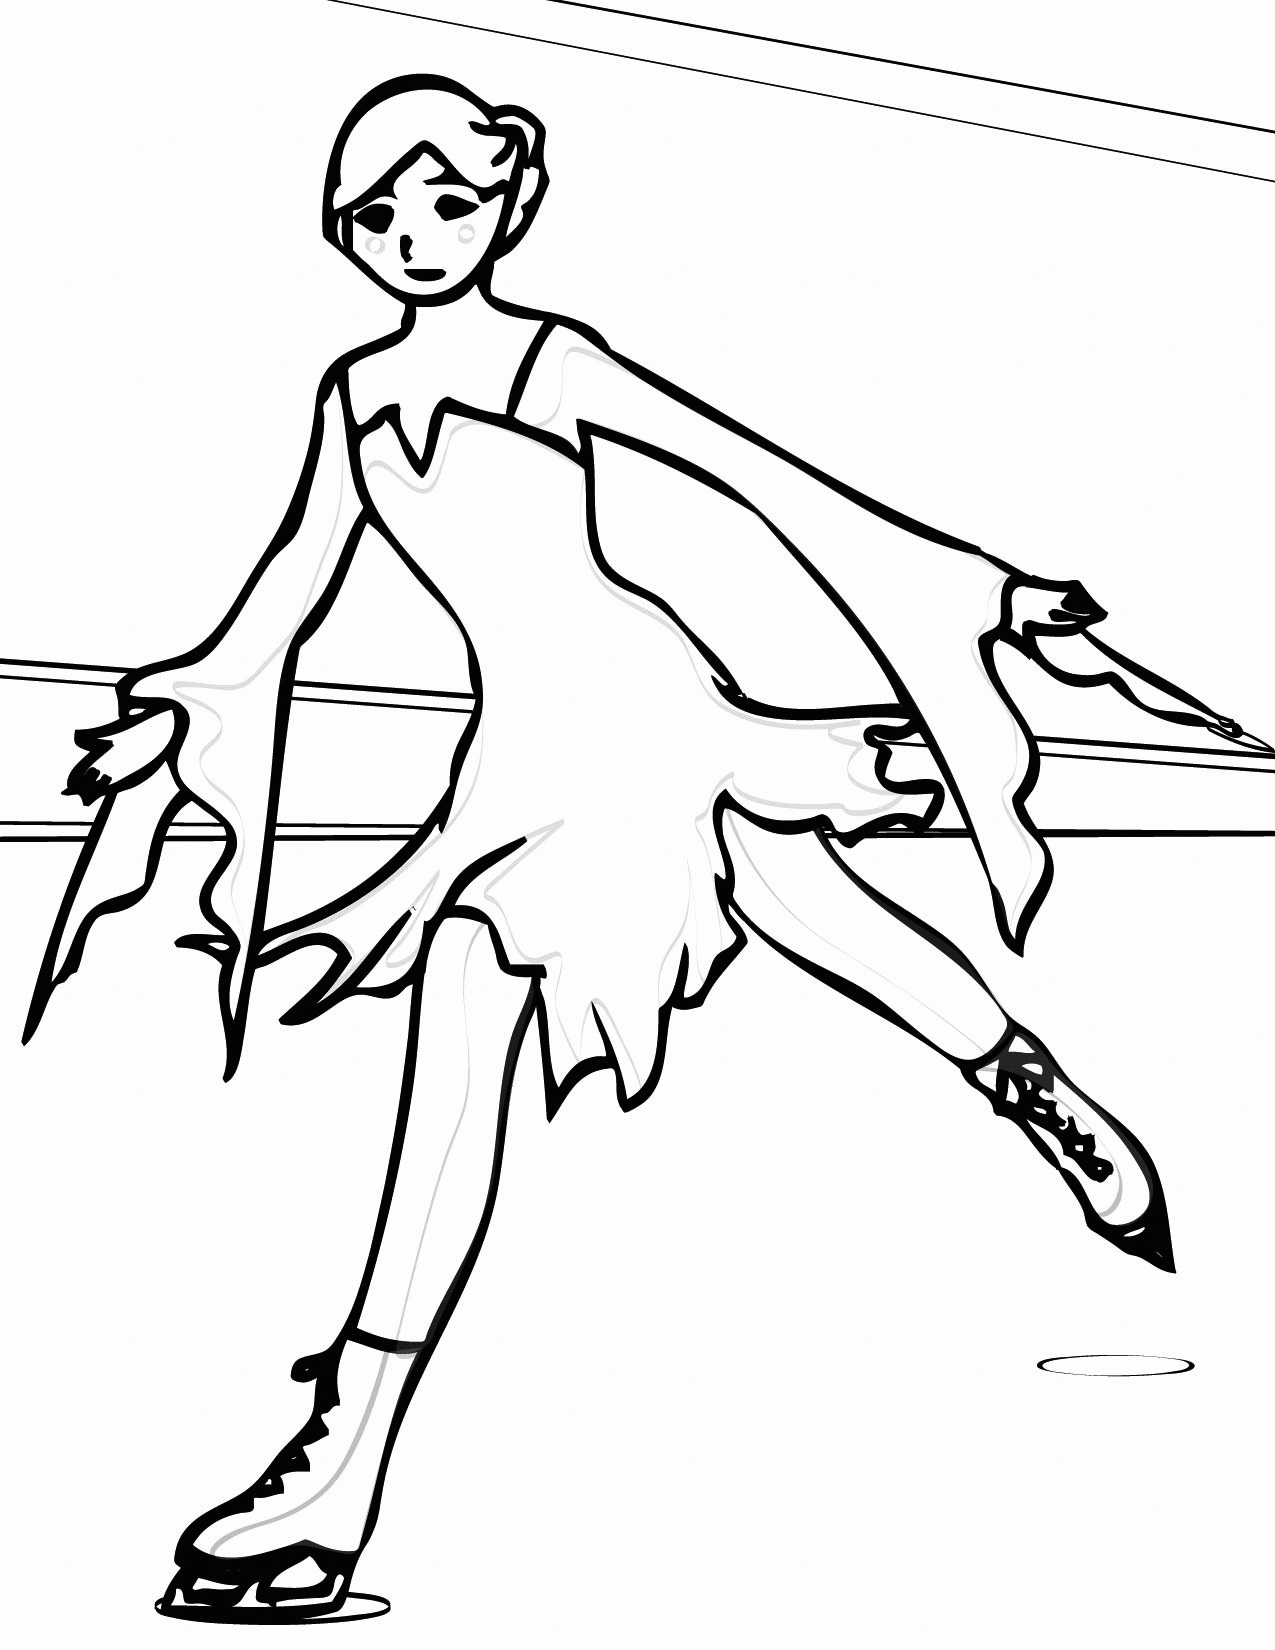 Ice Skater Coloring Page